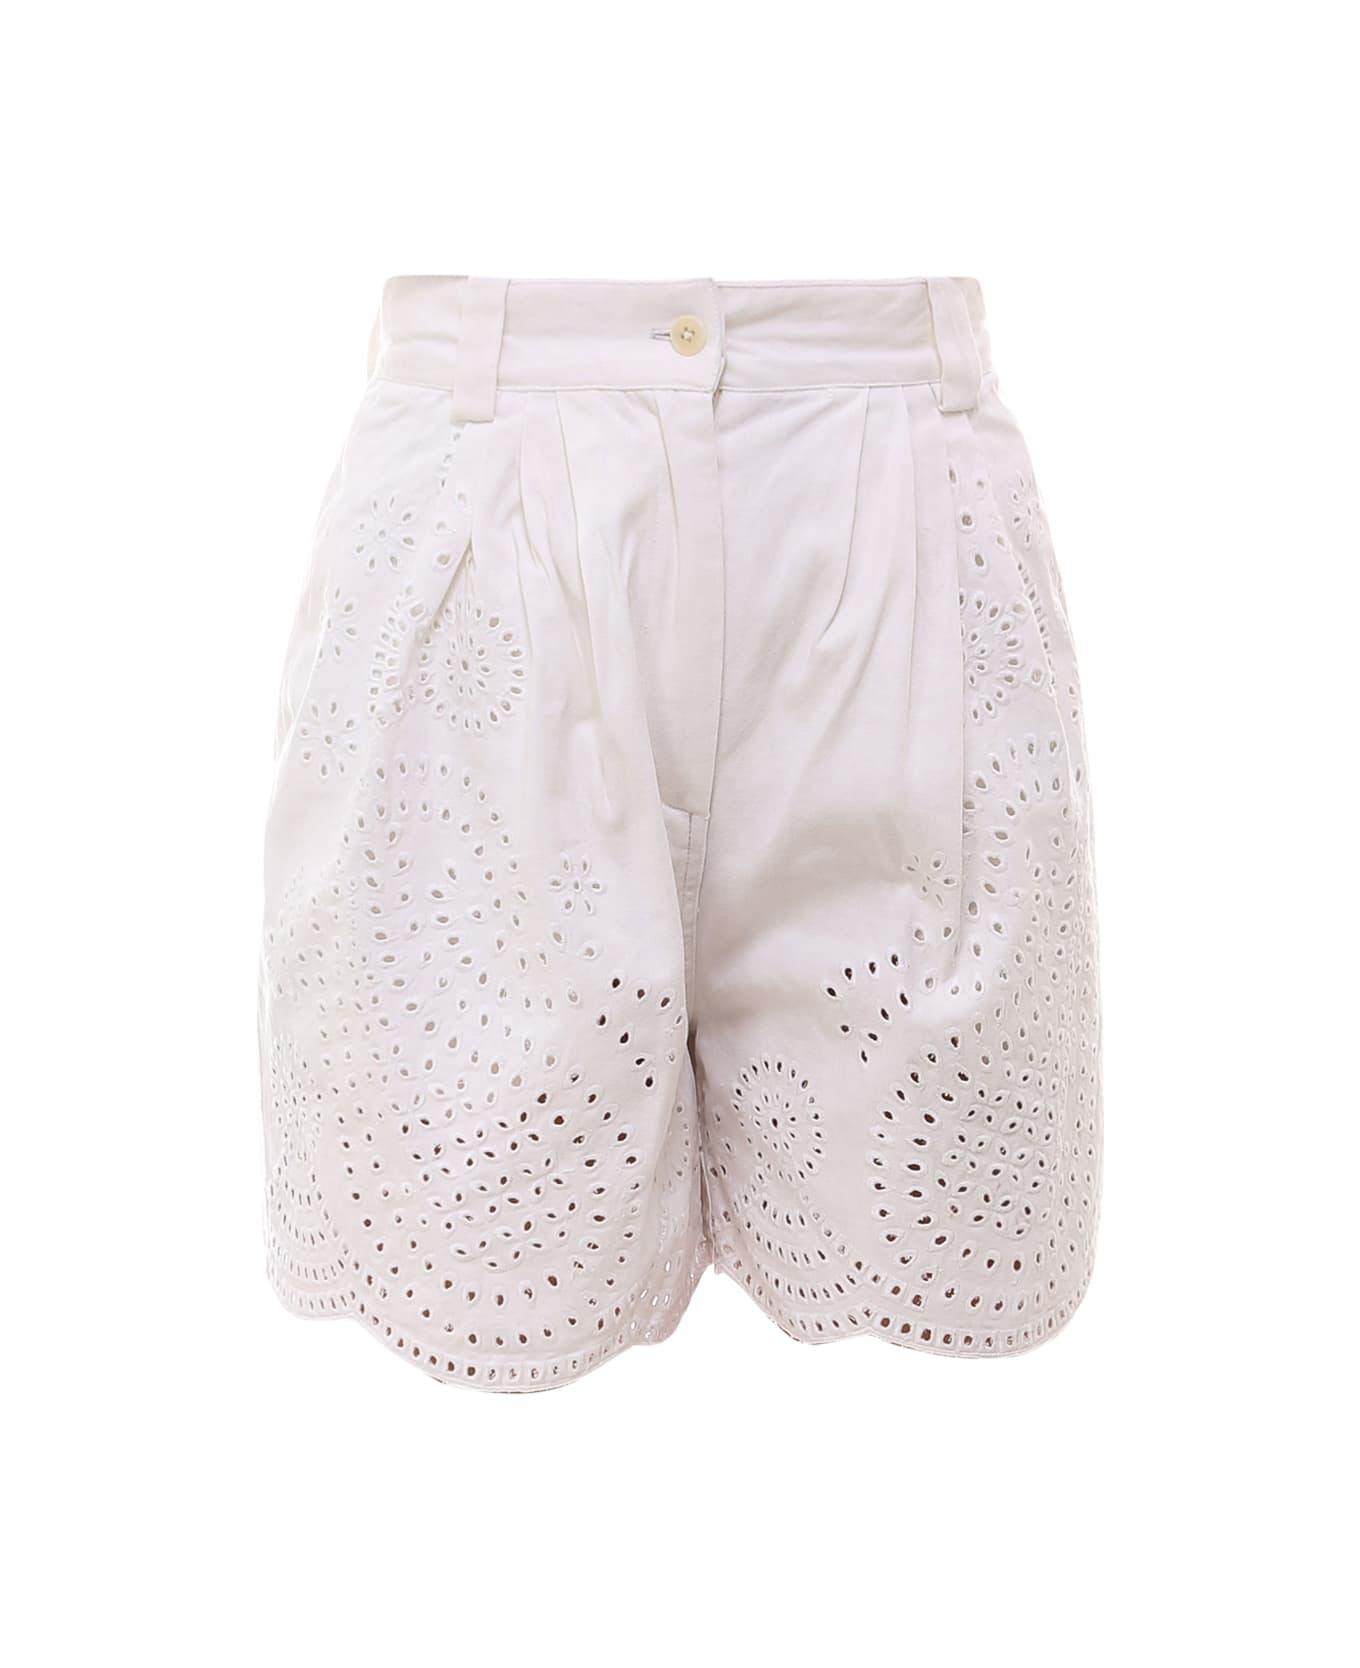 Laurence Bras Shorts - White